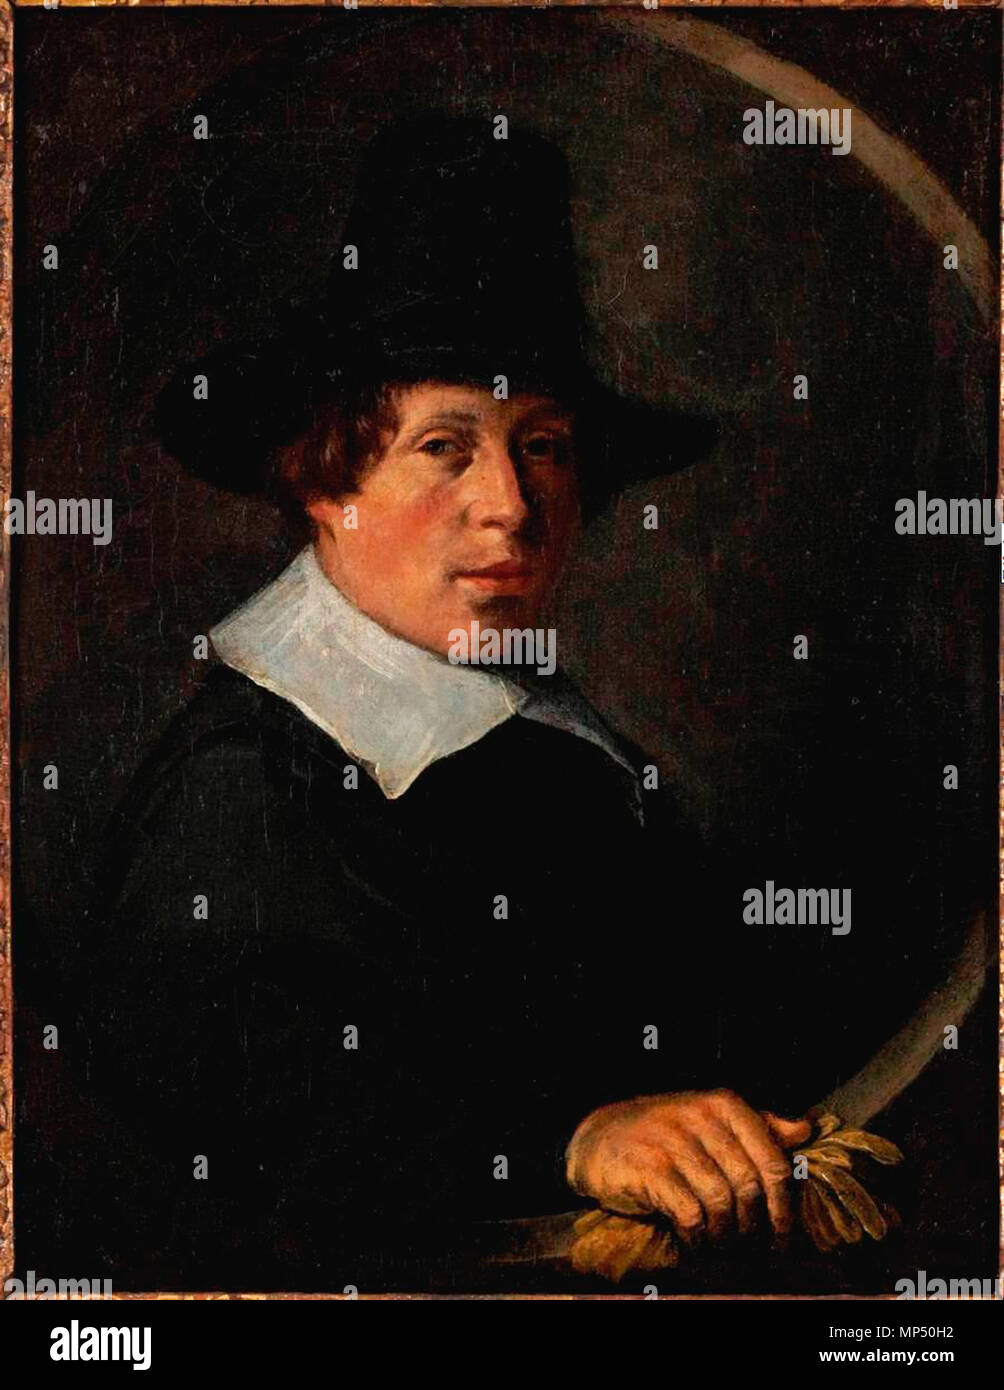 .  English: portrait of Vincent Laurensz van der Vinne. Frima Fox Hofrichter, Judith Leyster. A Woman Painter in Holland's Golden Age, Davaco, Doornspijk, 1989, descr. Cat. no.47 p.66, illus. no.46   This object is indexed in RKDimages, database of the Netherlands Institute for Art History, under the reference 238530. čeština | English | français | македонски | Nederlands | +/−   . 1652.   Judith Leyster  (1609–1660)     Alternative names Judita Leystar  Description Dutch painter and draughtsperson  Date of birth/death 28 July 1609 (baptised) 10 February 1660 (buried)  Location of birth/death  Stock Photo